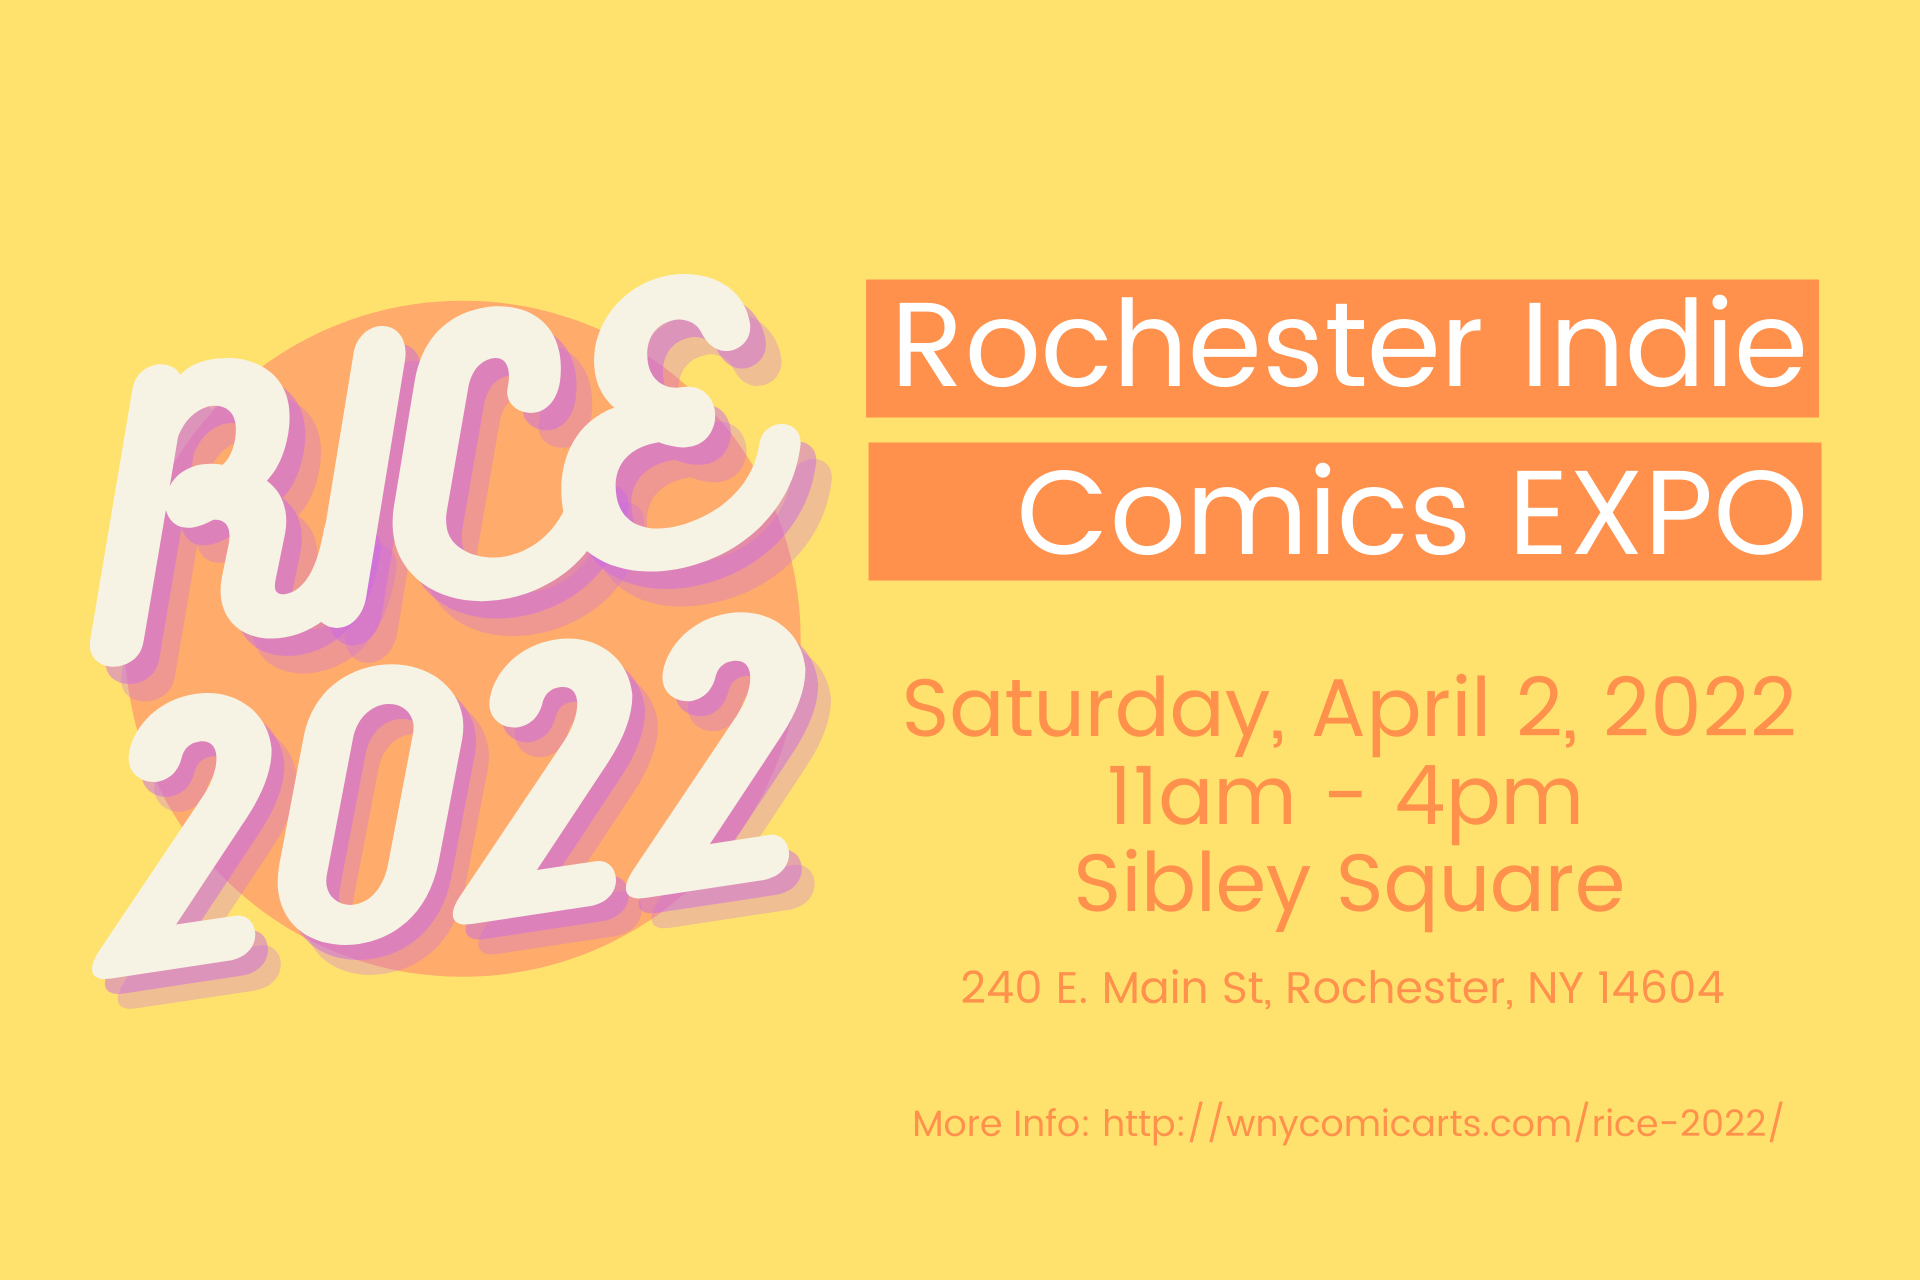 A yellow and orange graphic promoting the Rochester Indie Comics Expo.